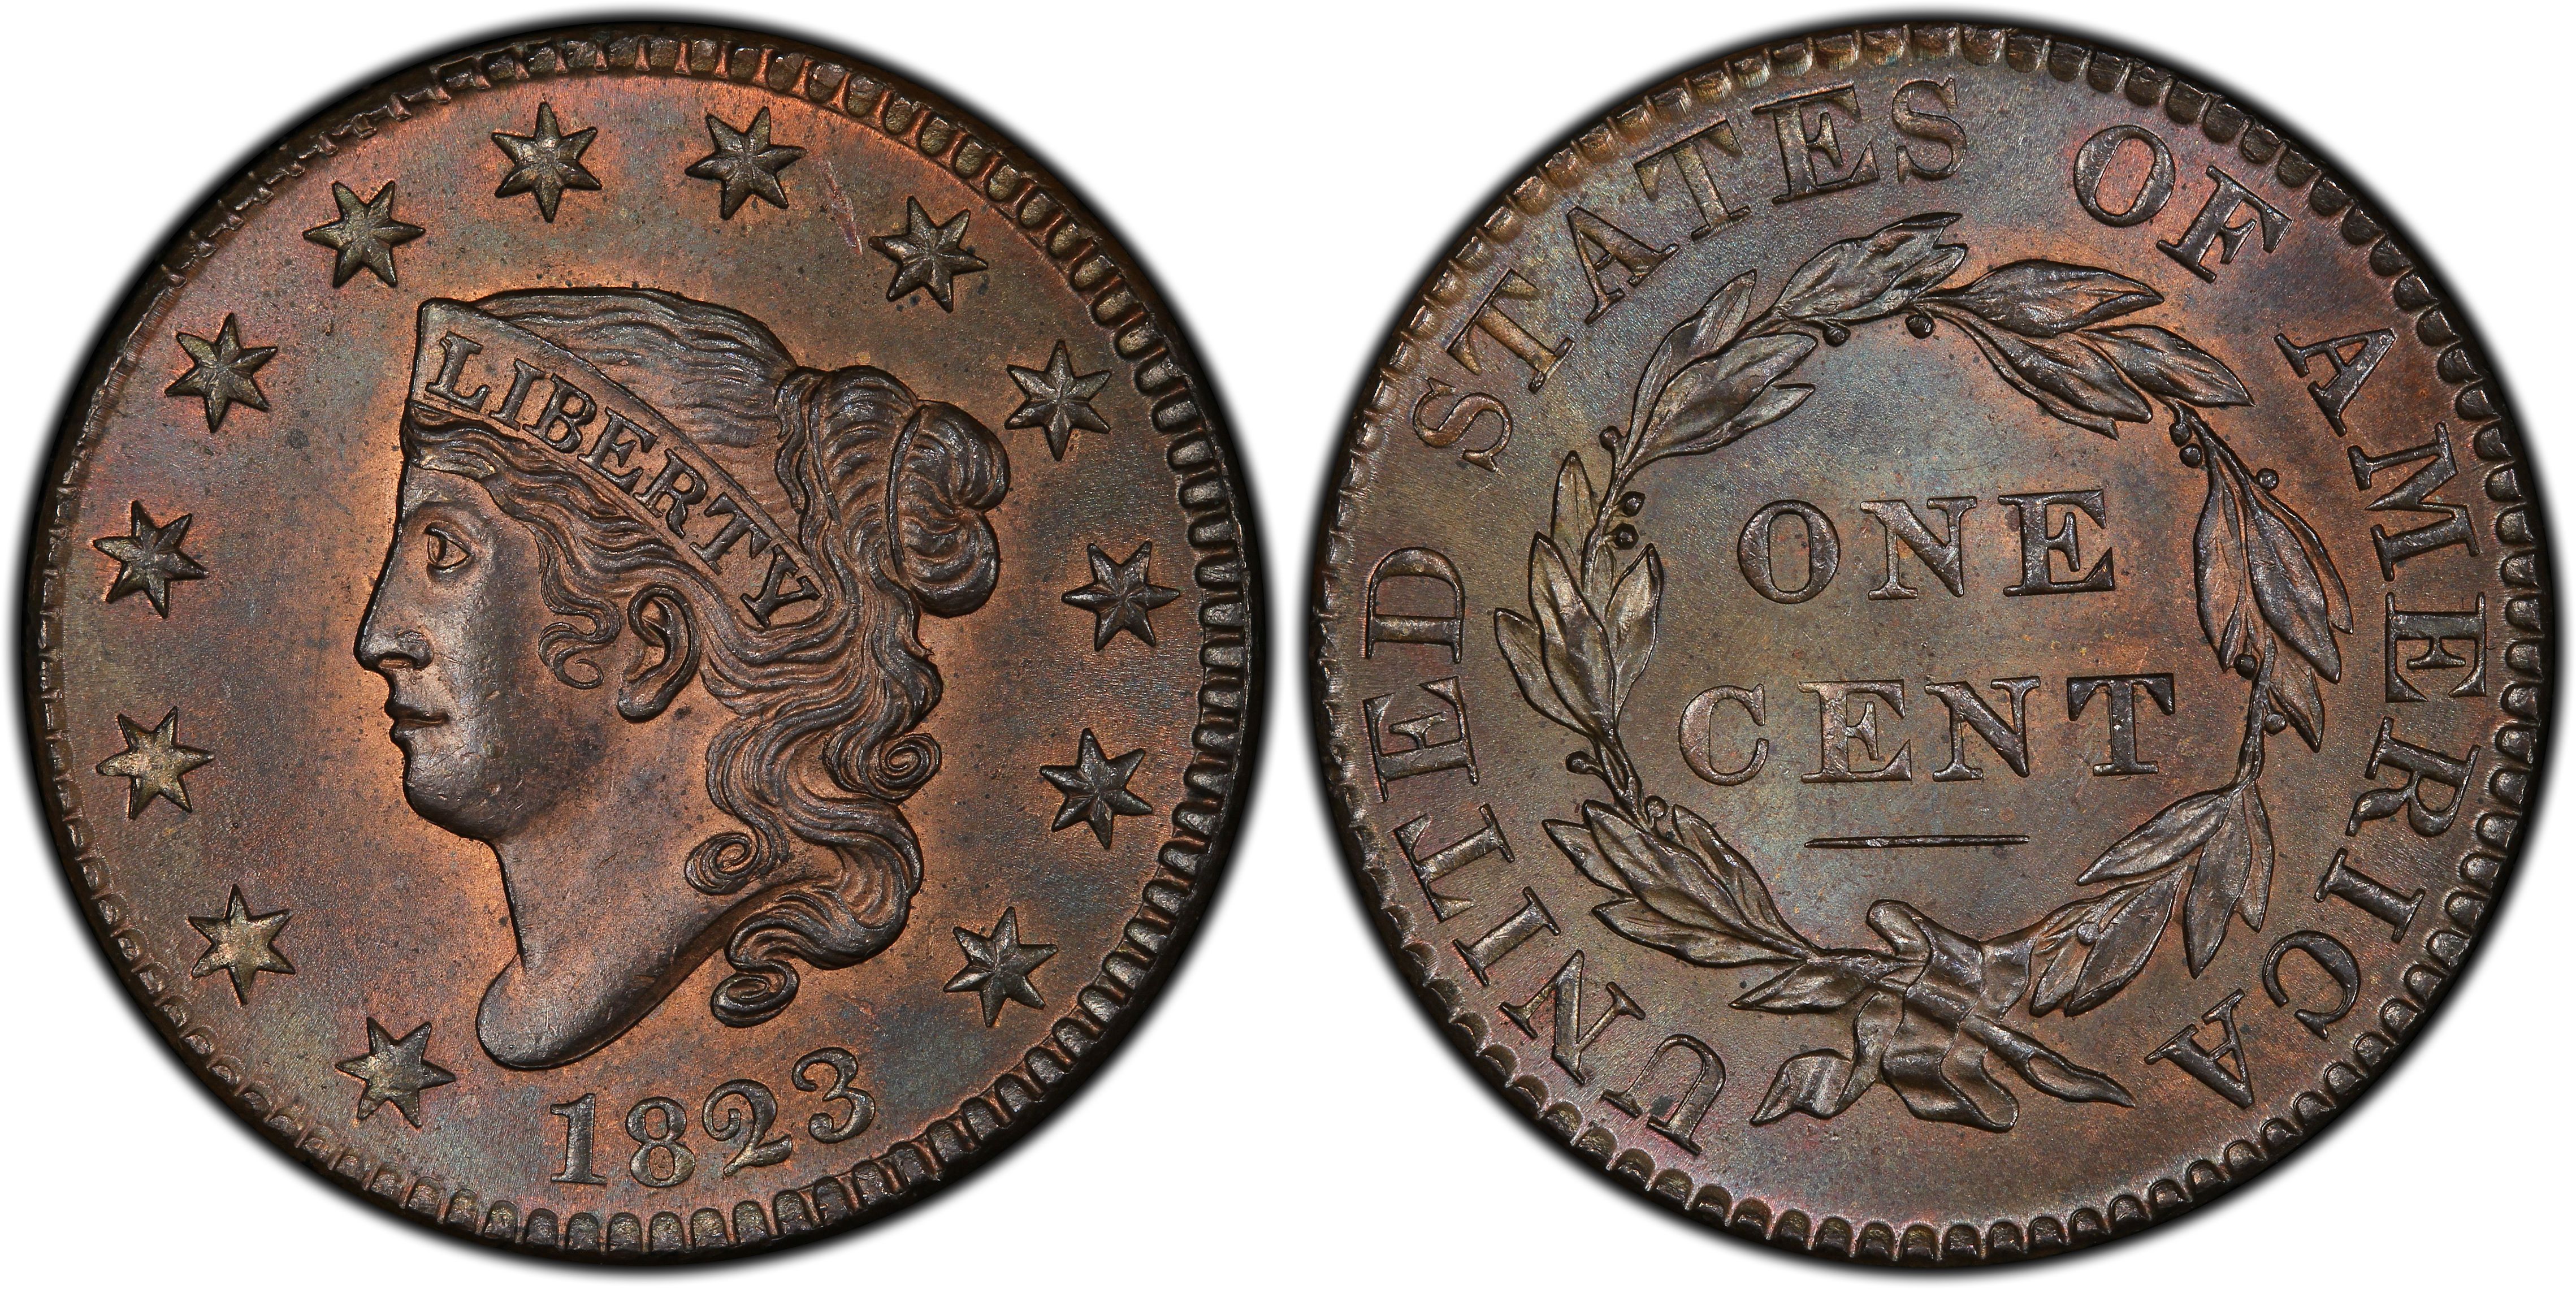 The Last Large U.S. One-Cent Coins